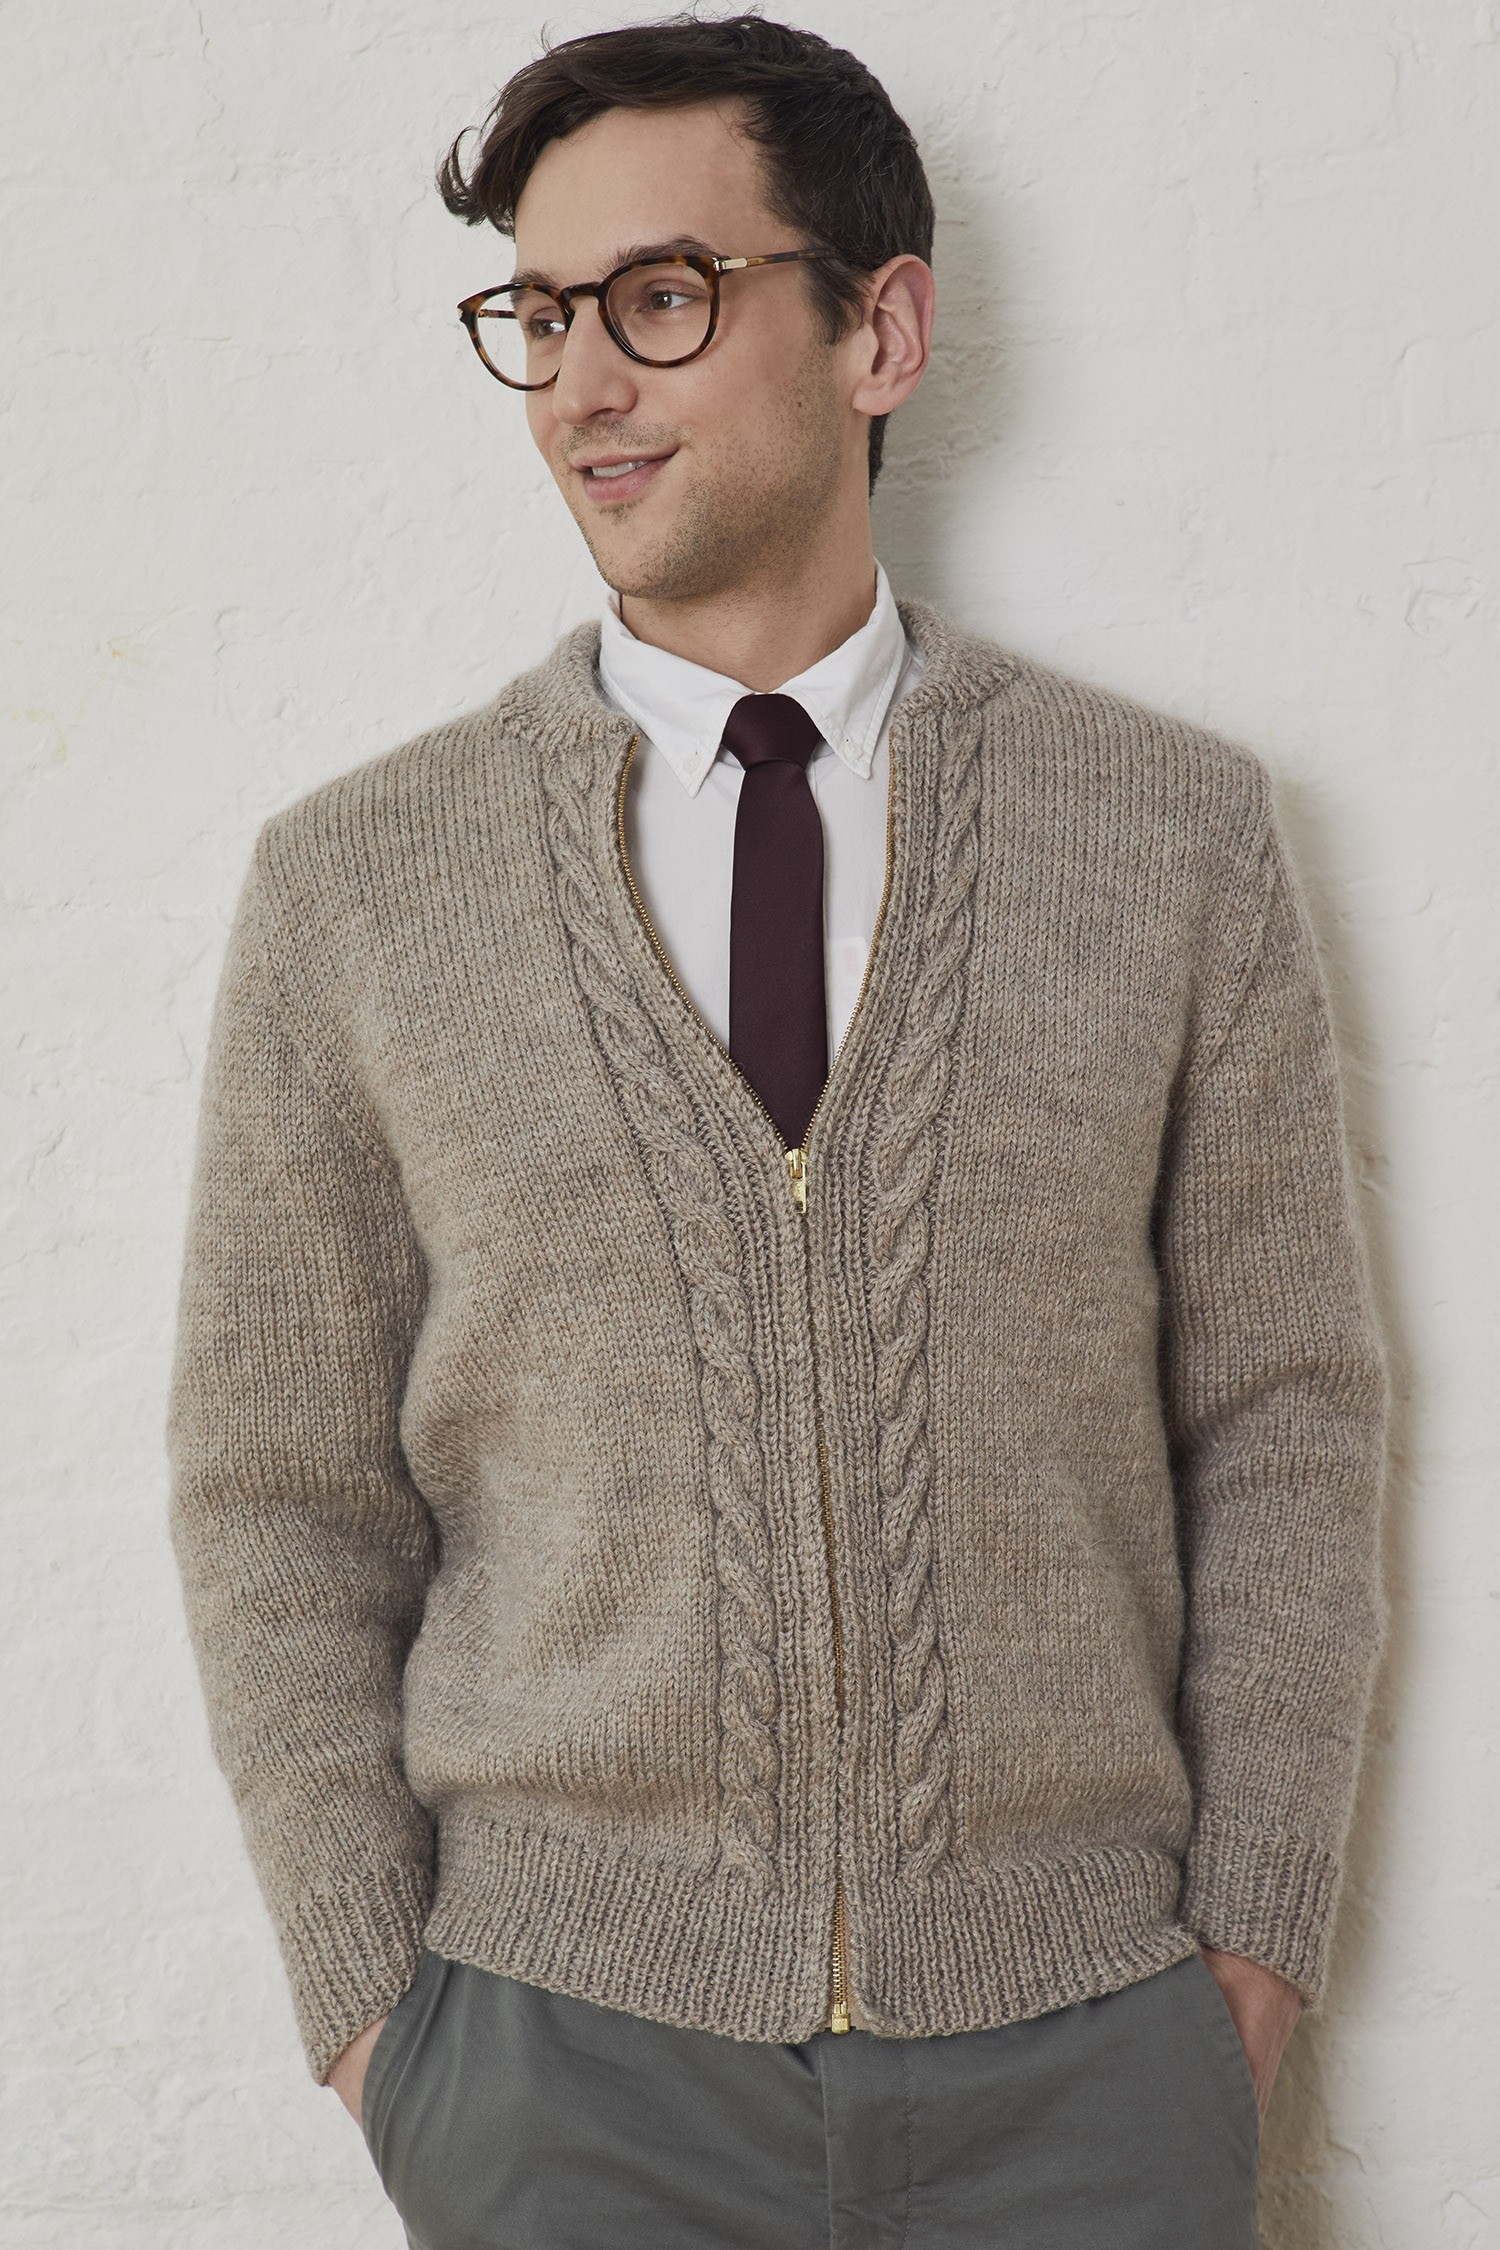 Free Knitting Patterns for Men: A Stylish Way to Keep Warm - Mike Natur